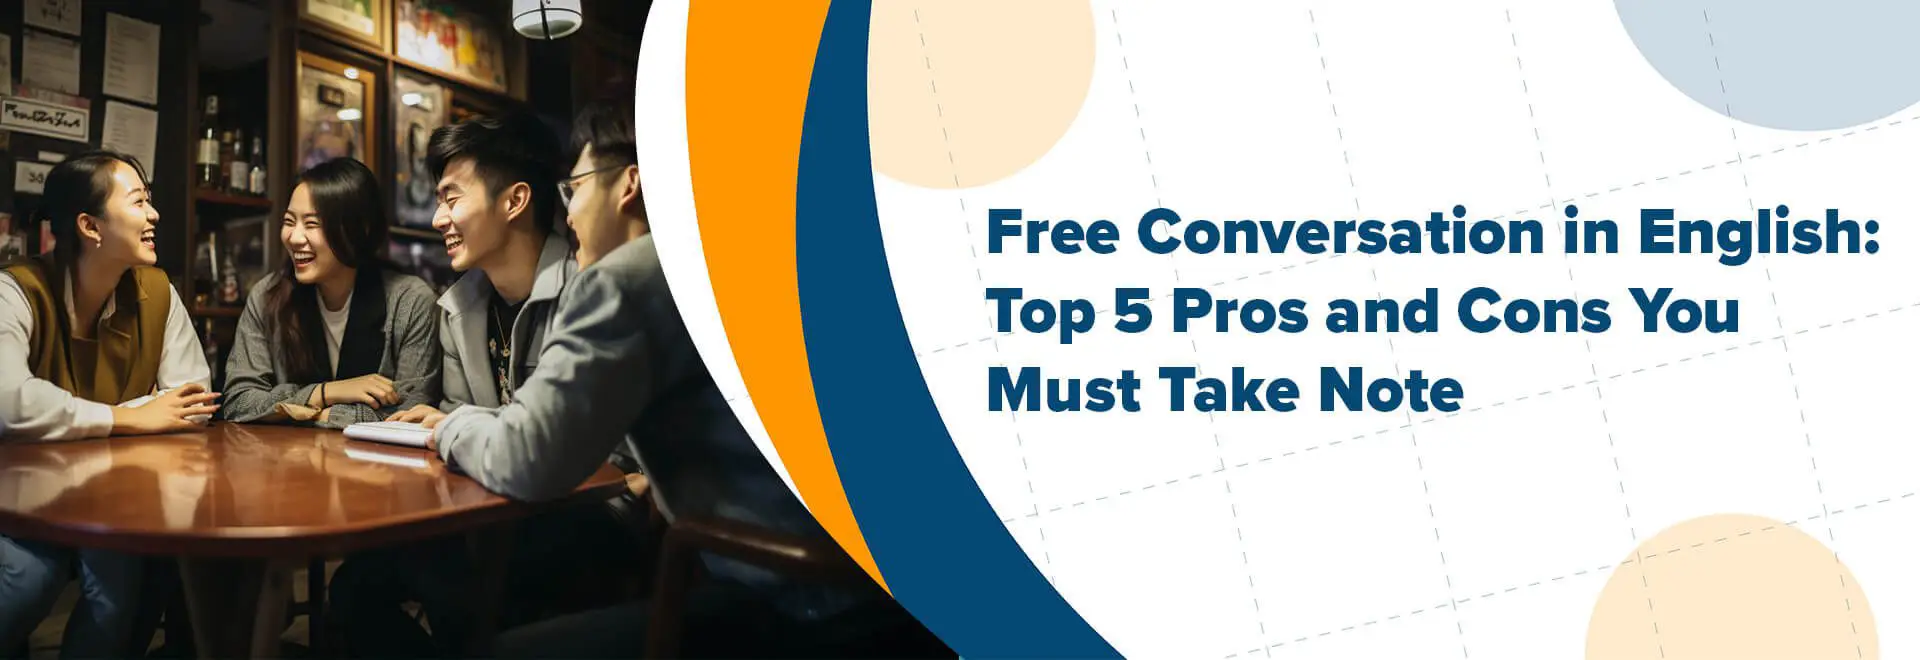 Free Conversation in English: Top 5 Pros and Cons You Must Take Note